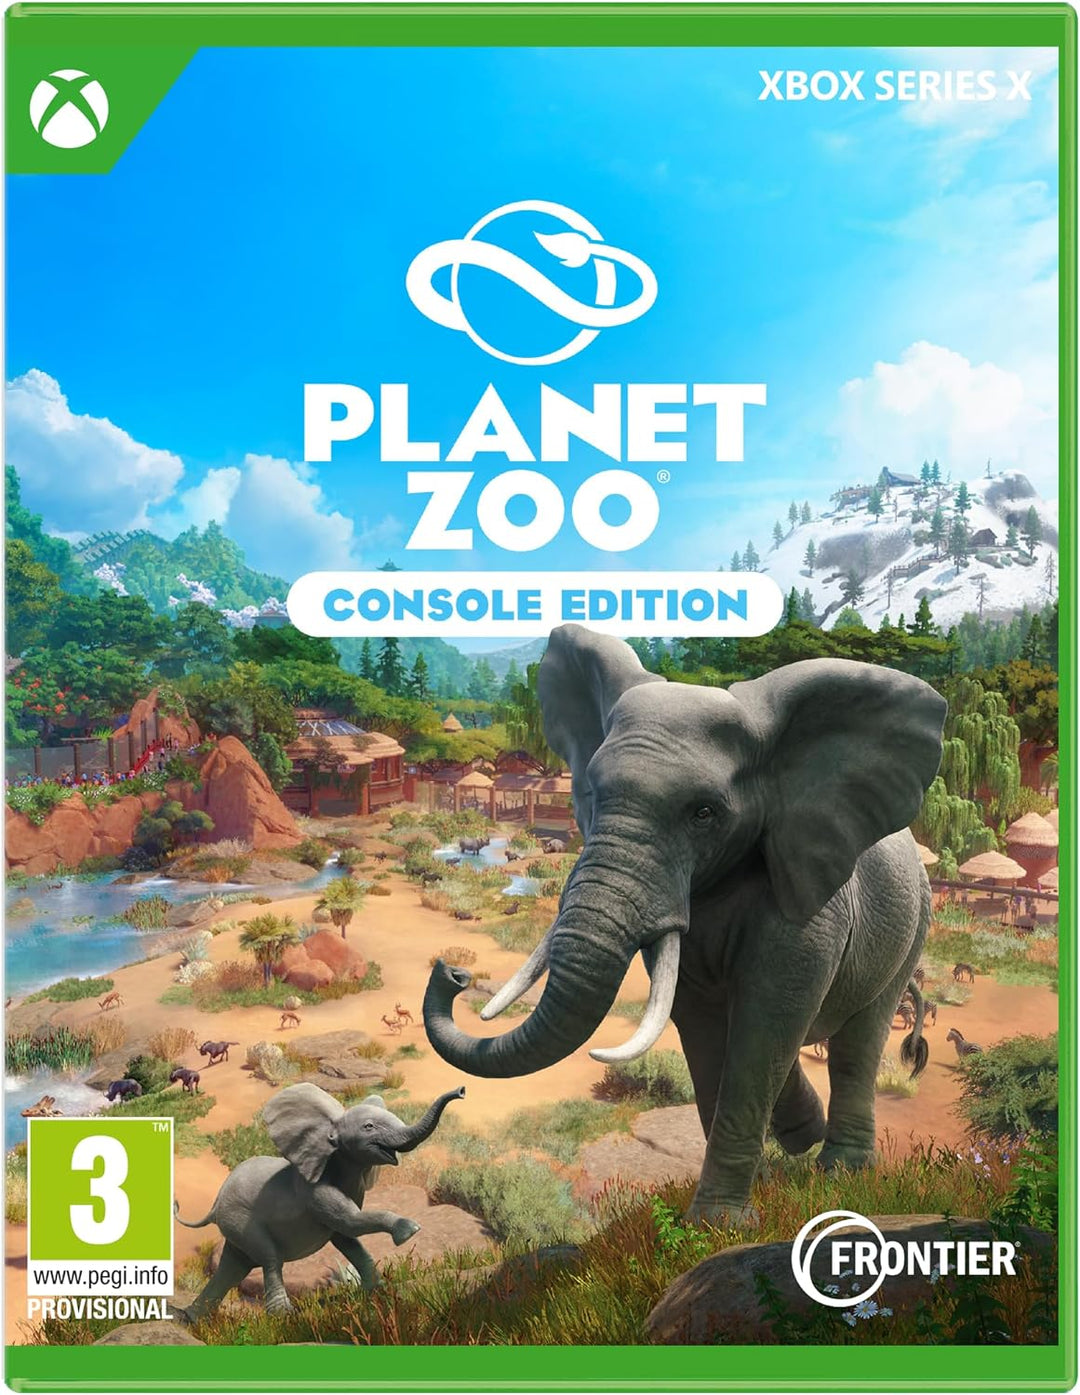 Planet Zoo (Xbox Series X) Console Edition